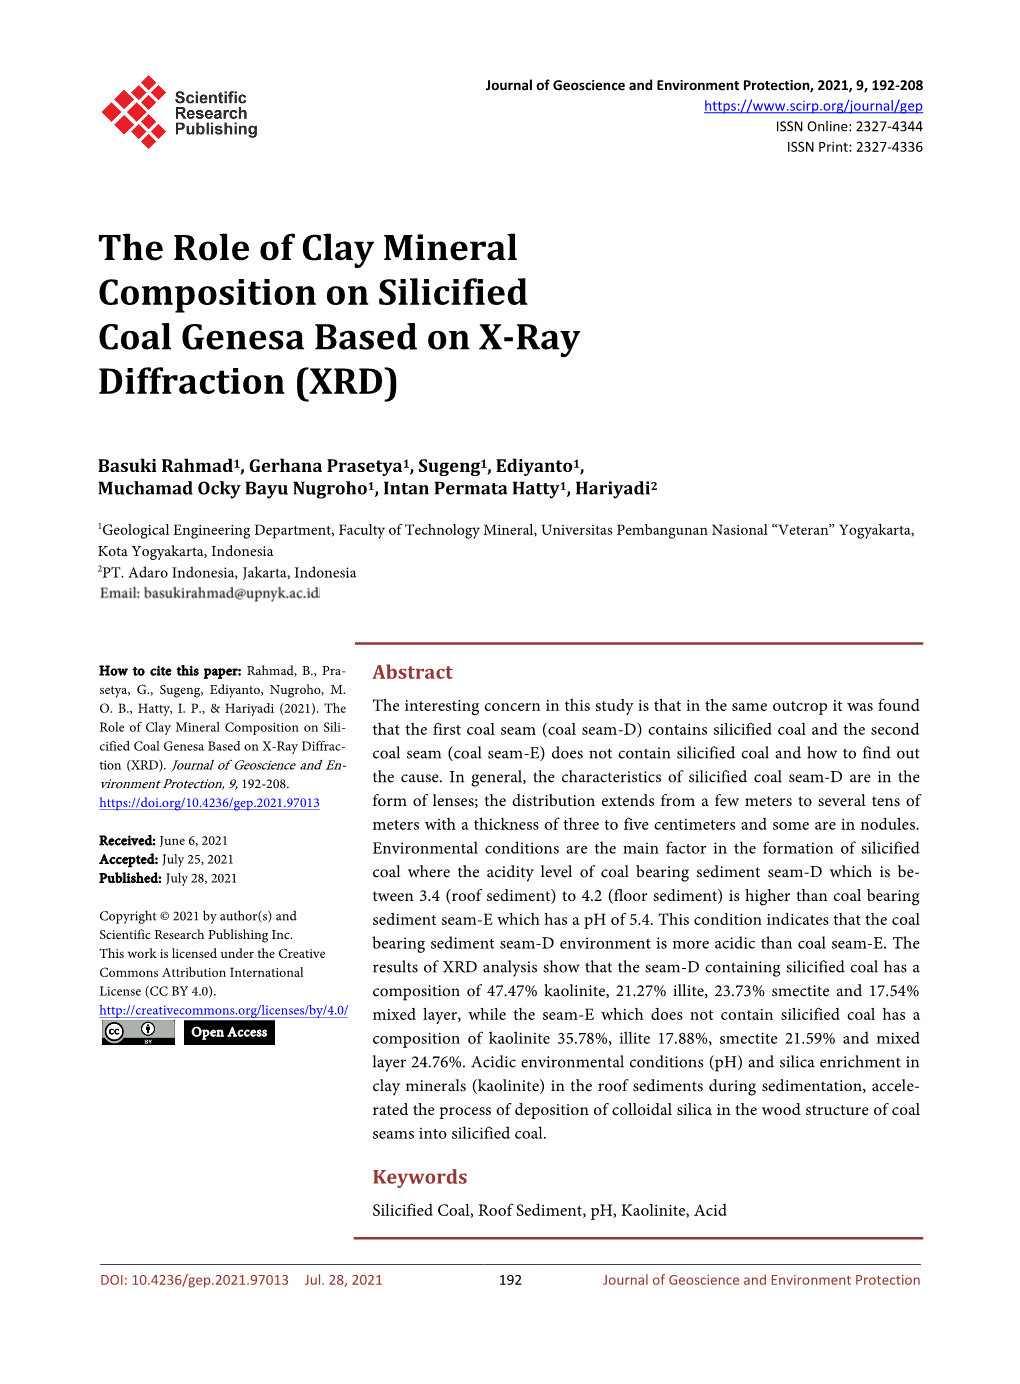 The Role of Clay Mineral Composition on Silicified Coal Genesa Based on X-Ray Diffraction (XRD)